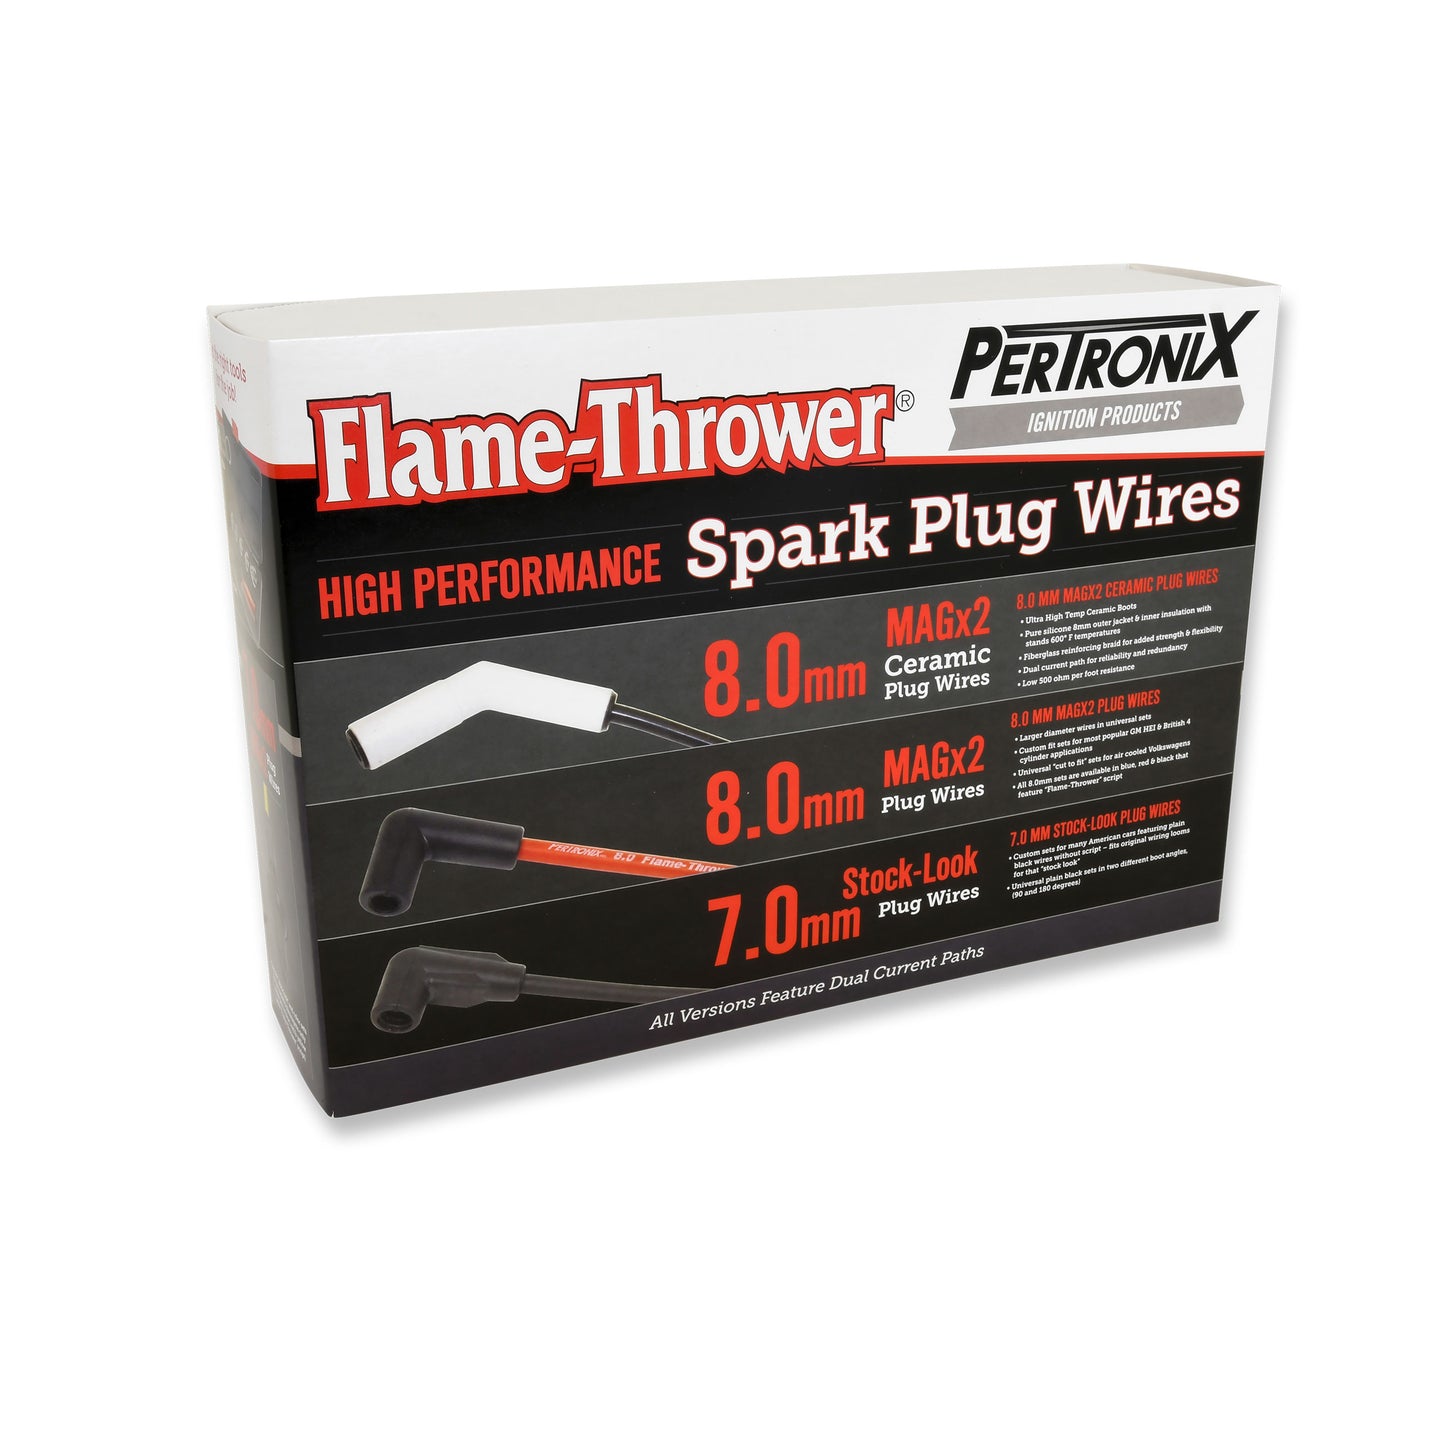 PerTronix 808215 Flame-Thrower Spark Plug Wires 8 cyl 8mm Universal 135 Degree Black